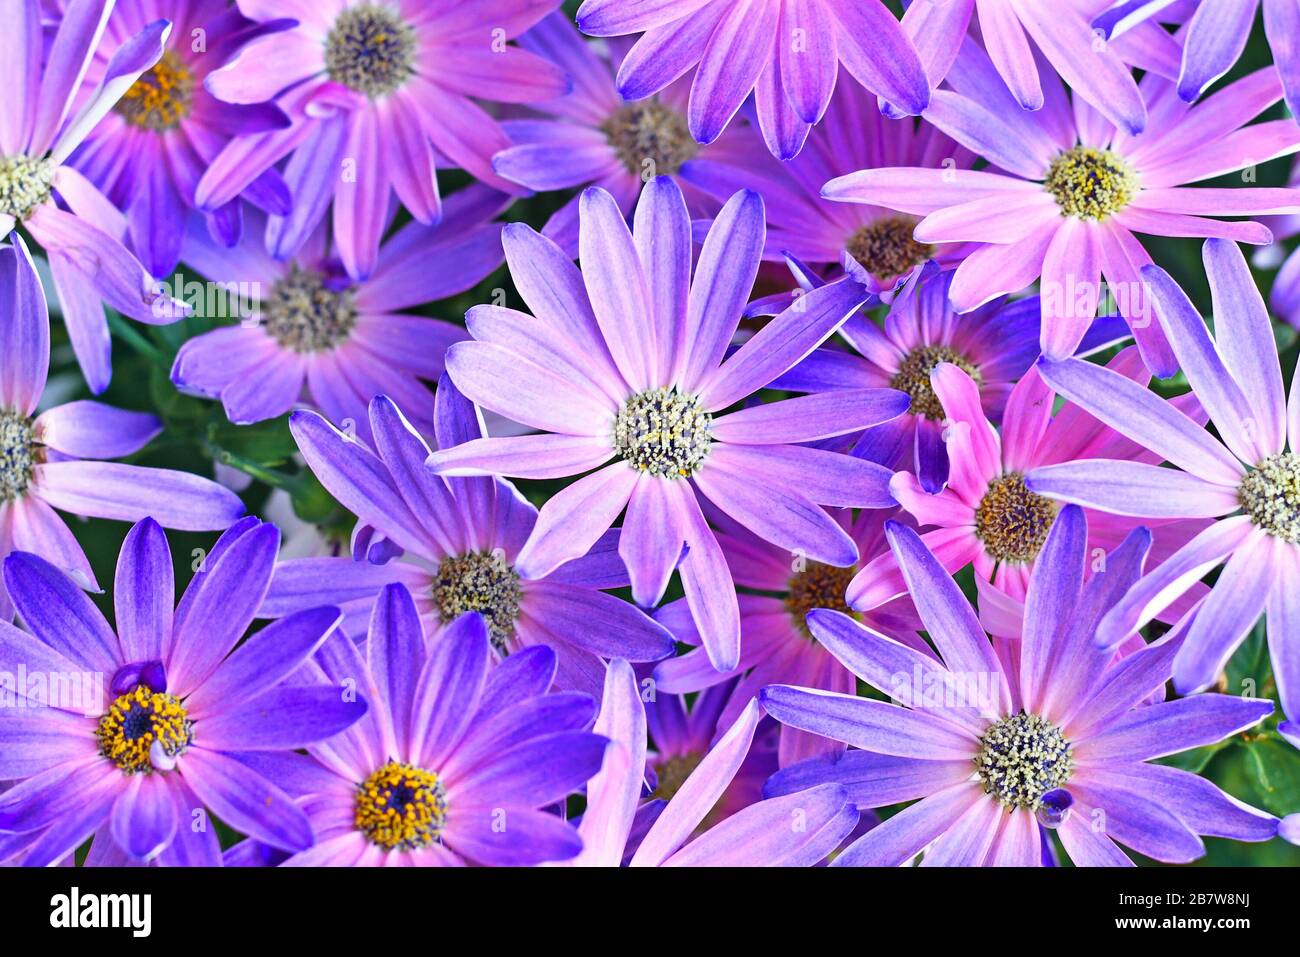 Top view on pink and purple blooming 'Pericallis Senettii Marguerite Cineraria' spring flowers Stock Photo